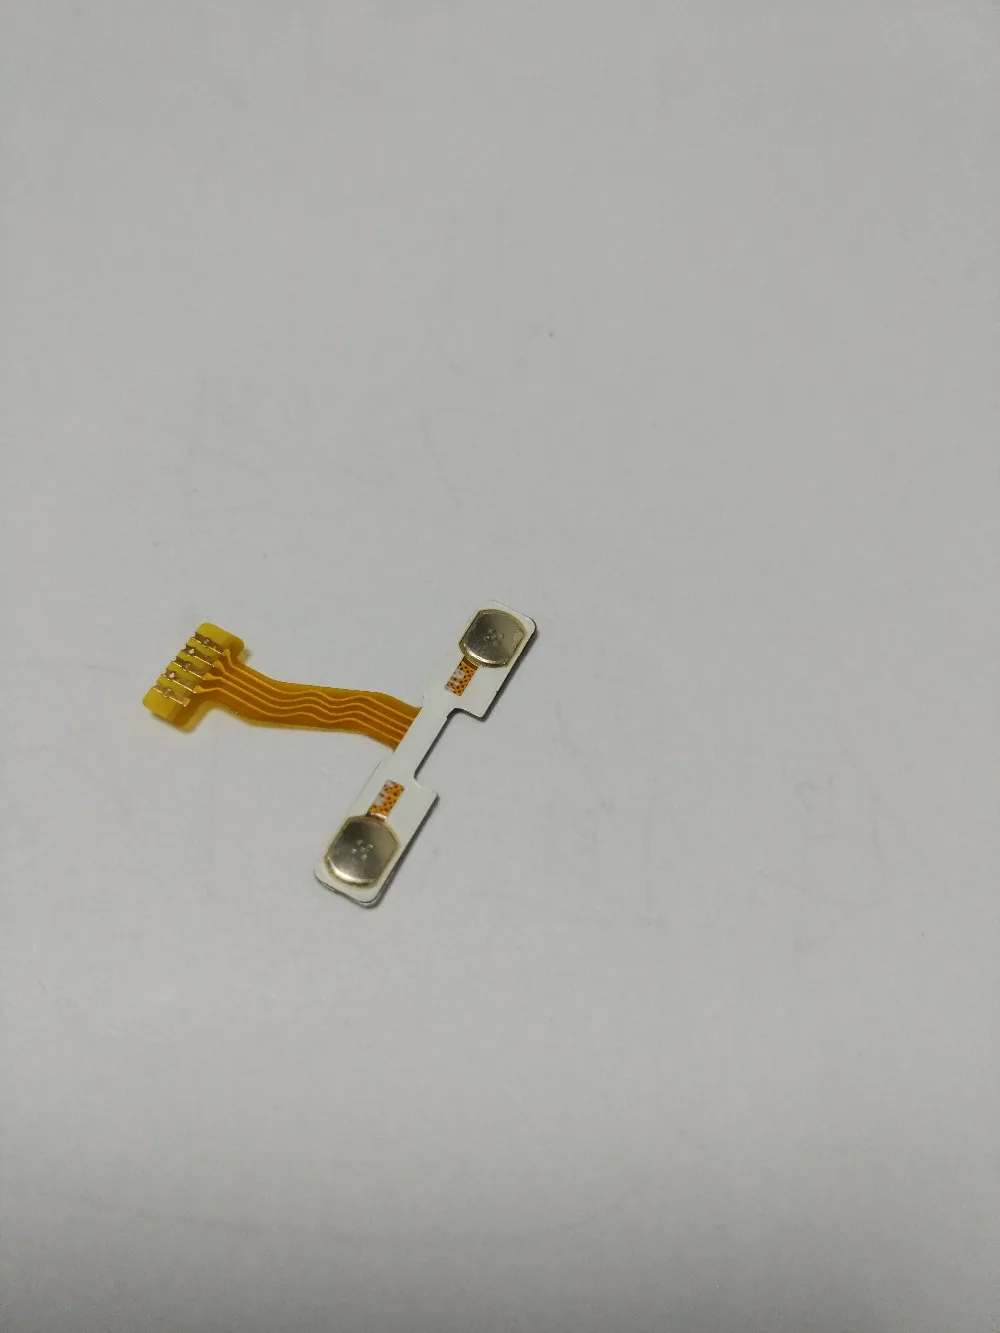 

100% New Thl T200 Volume up/down key Button Flex cable FPC repair replacement for Thl T200 Phone Freeshipping+Tracking